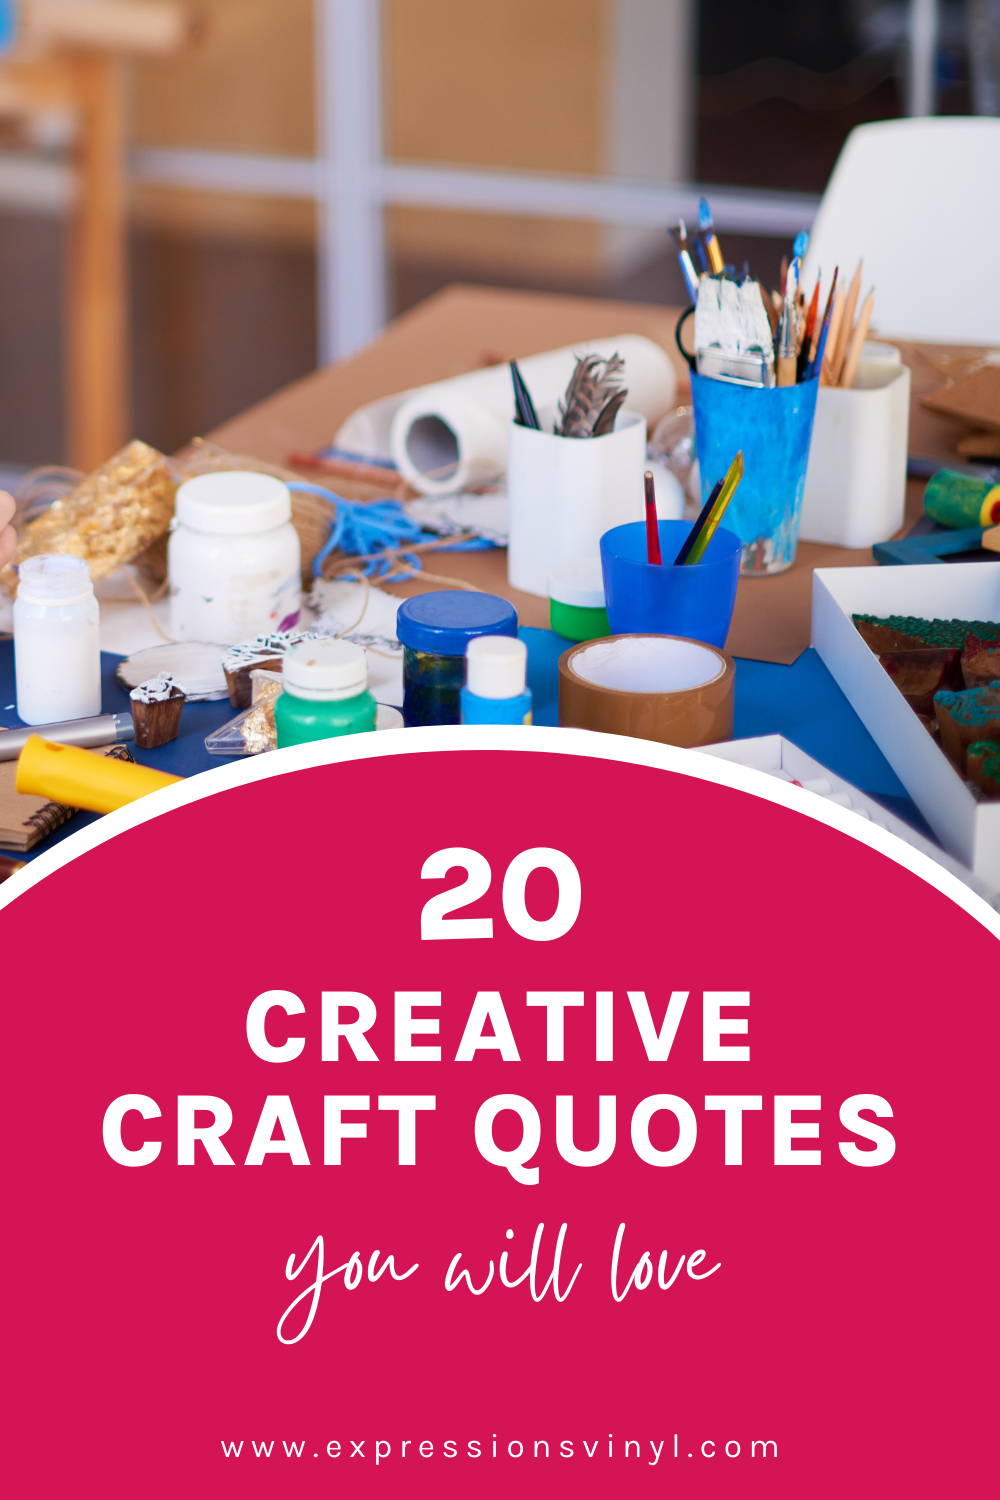 Picture of crafts with text 